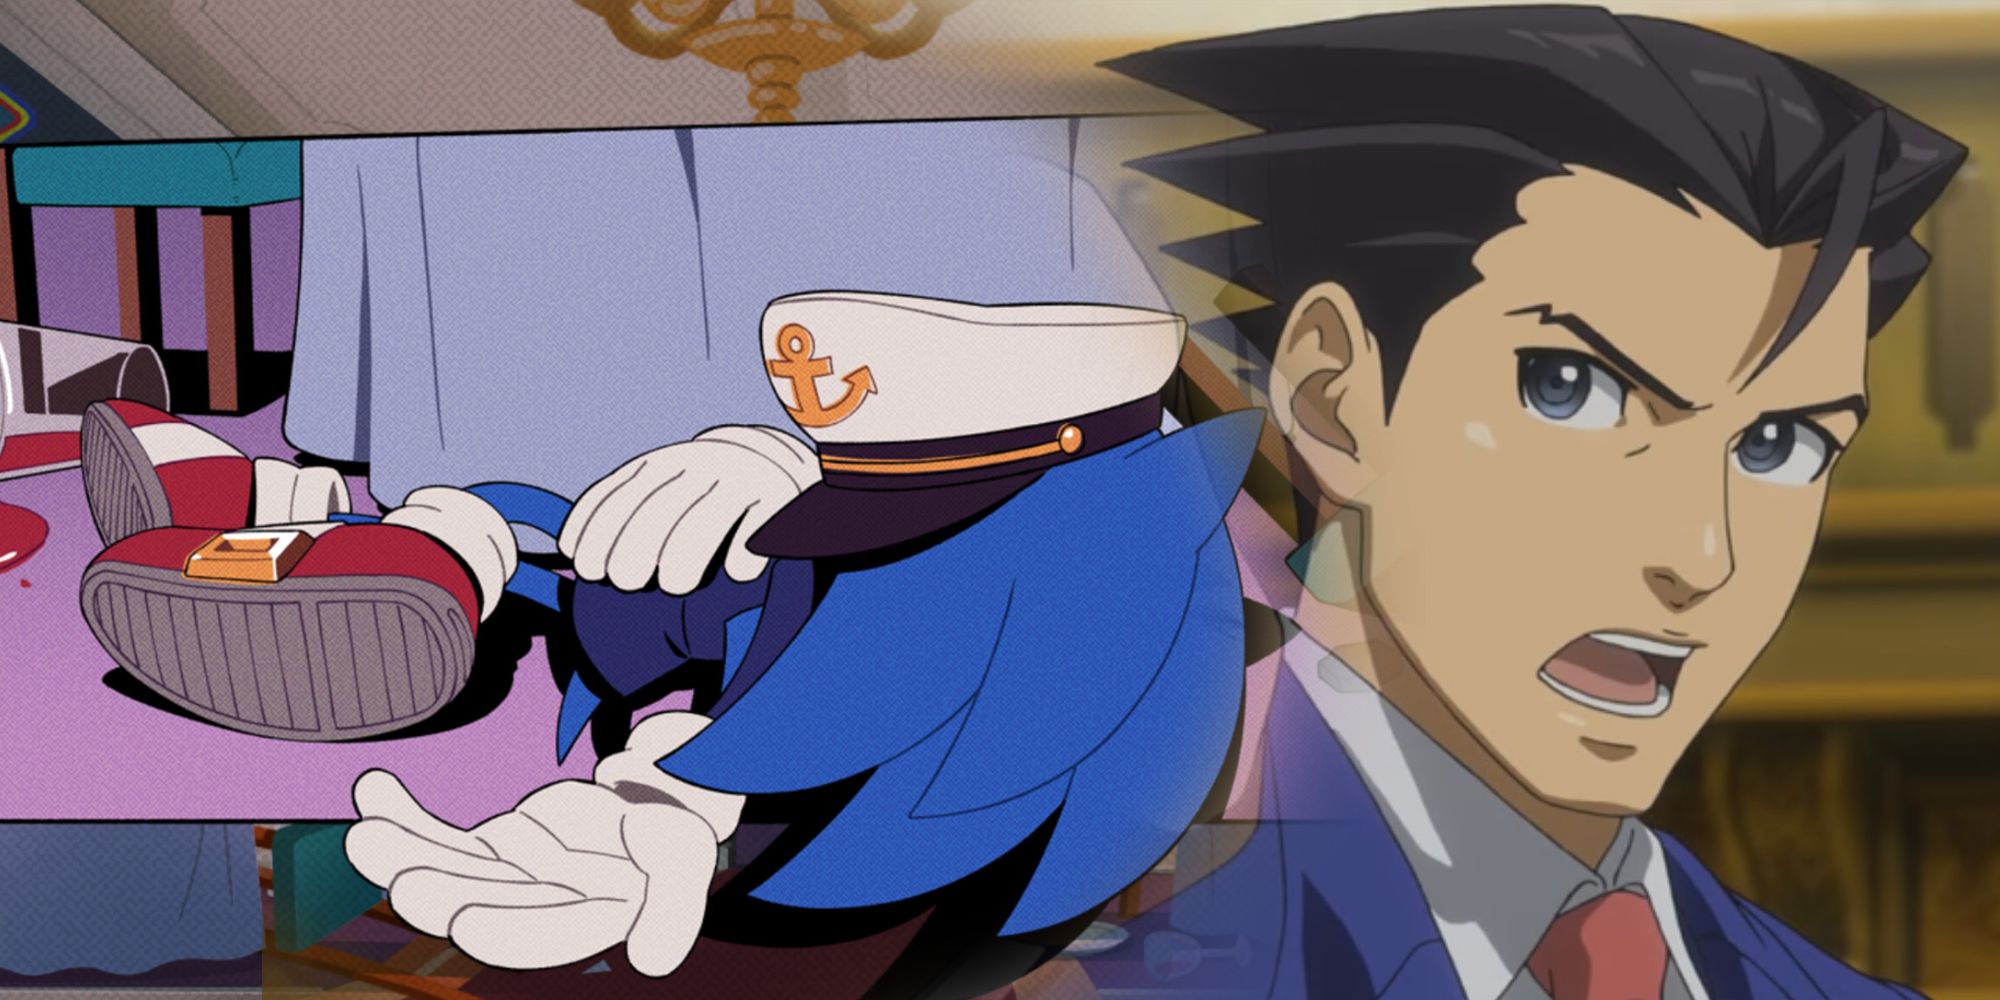 The Murder of Sonic The Hedgehog and Phoenix Wright Ace Attorney gameplay